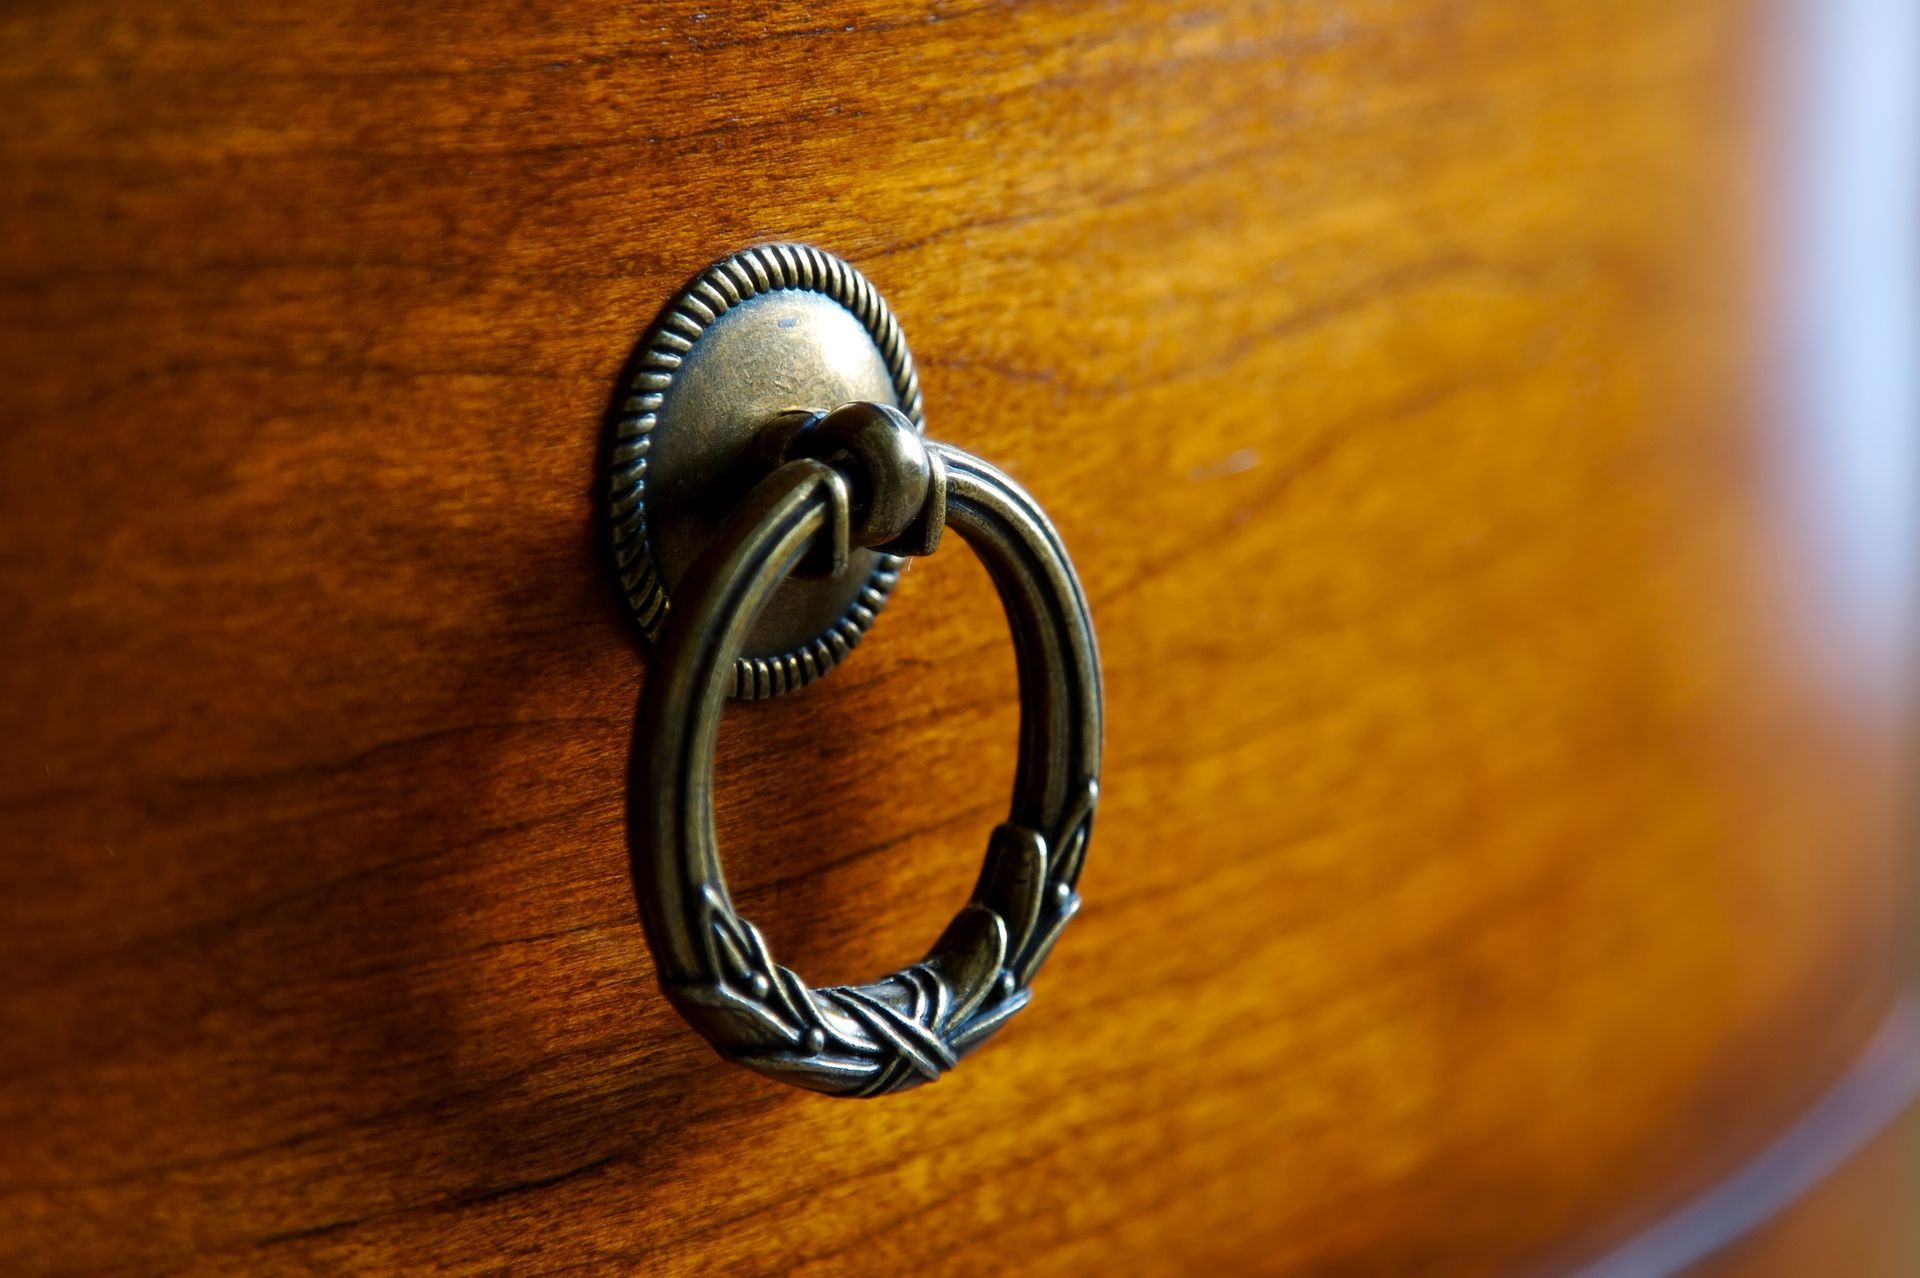 A close up of a brass handle on a wooden cabinet.